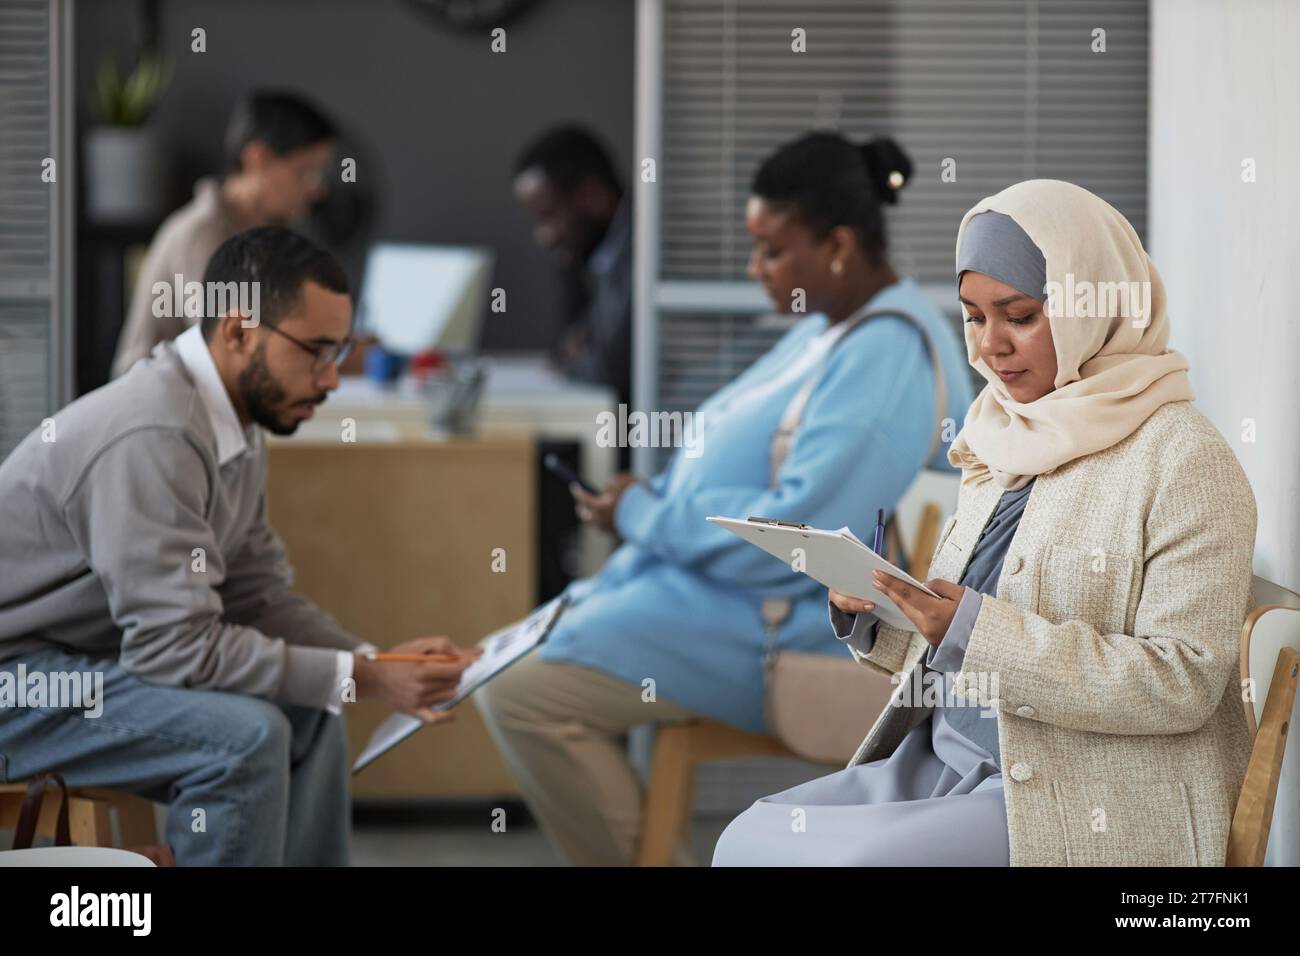 Young serious female applicant in hijab reading questions of visa application form while filling it in against other people Stock Photo